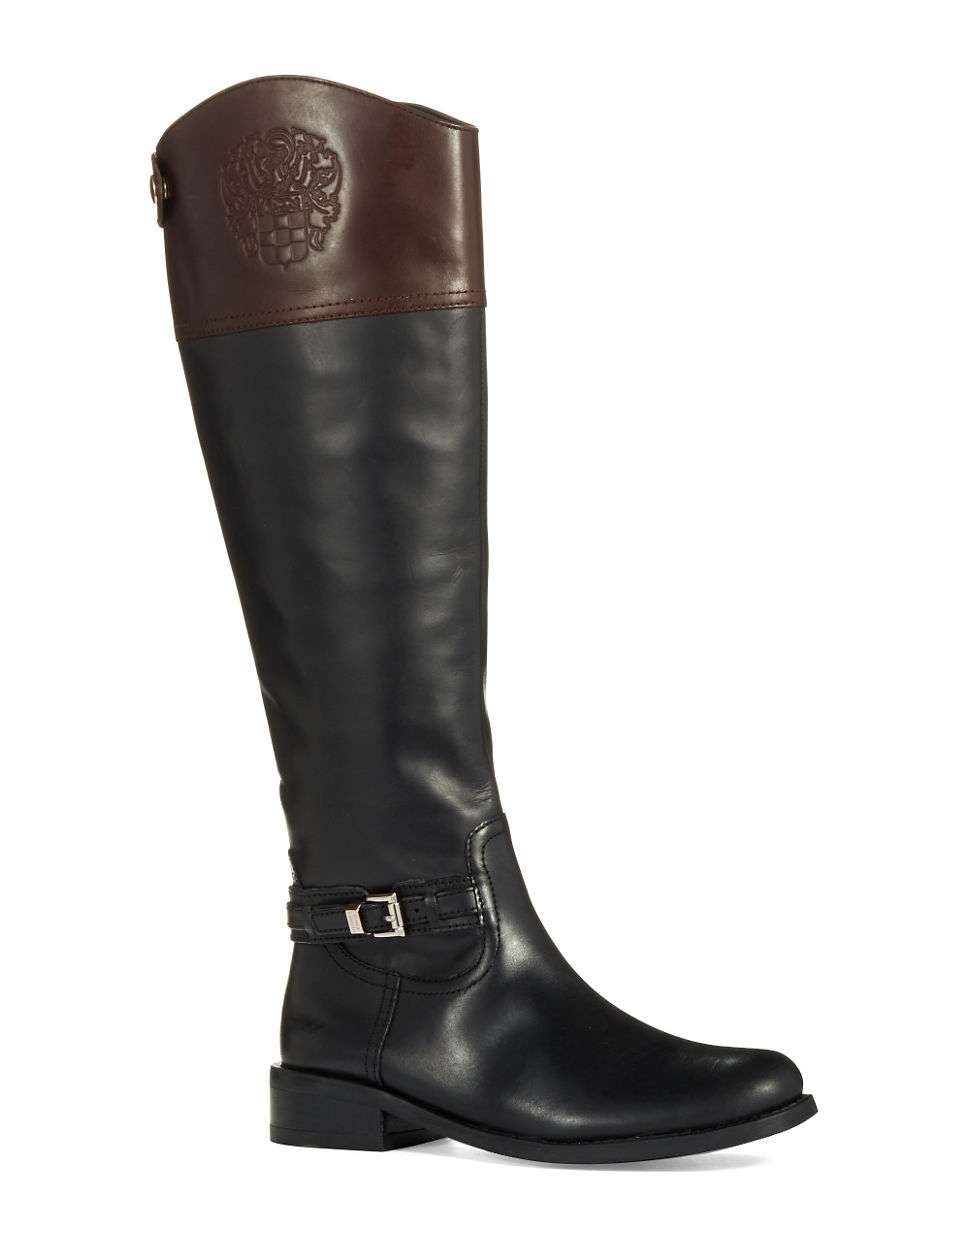 Vince Camuto Kable Wide Calf Riding Boots in Black (Black/Brown)